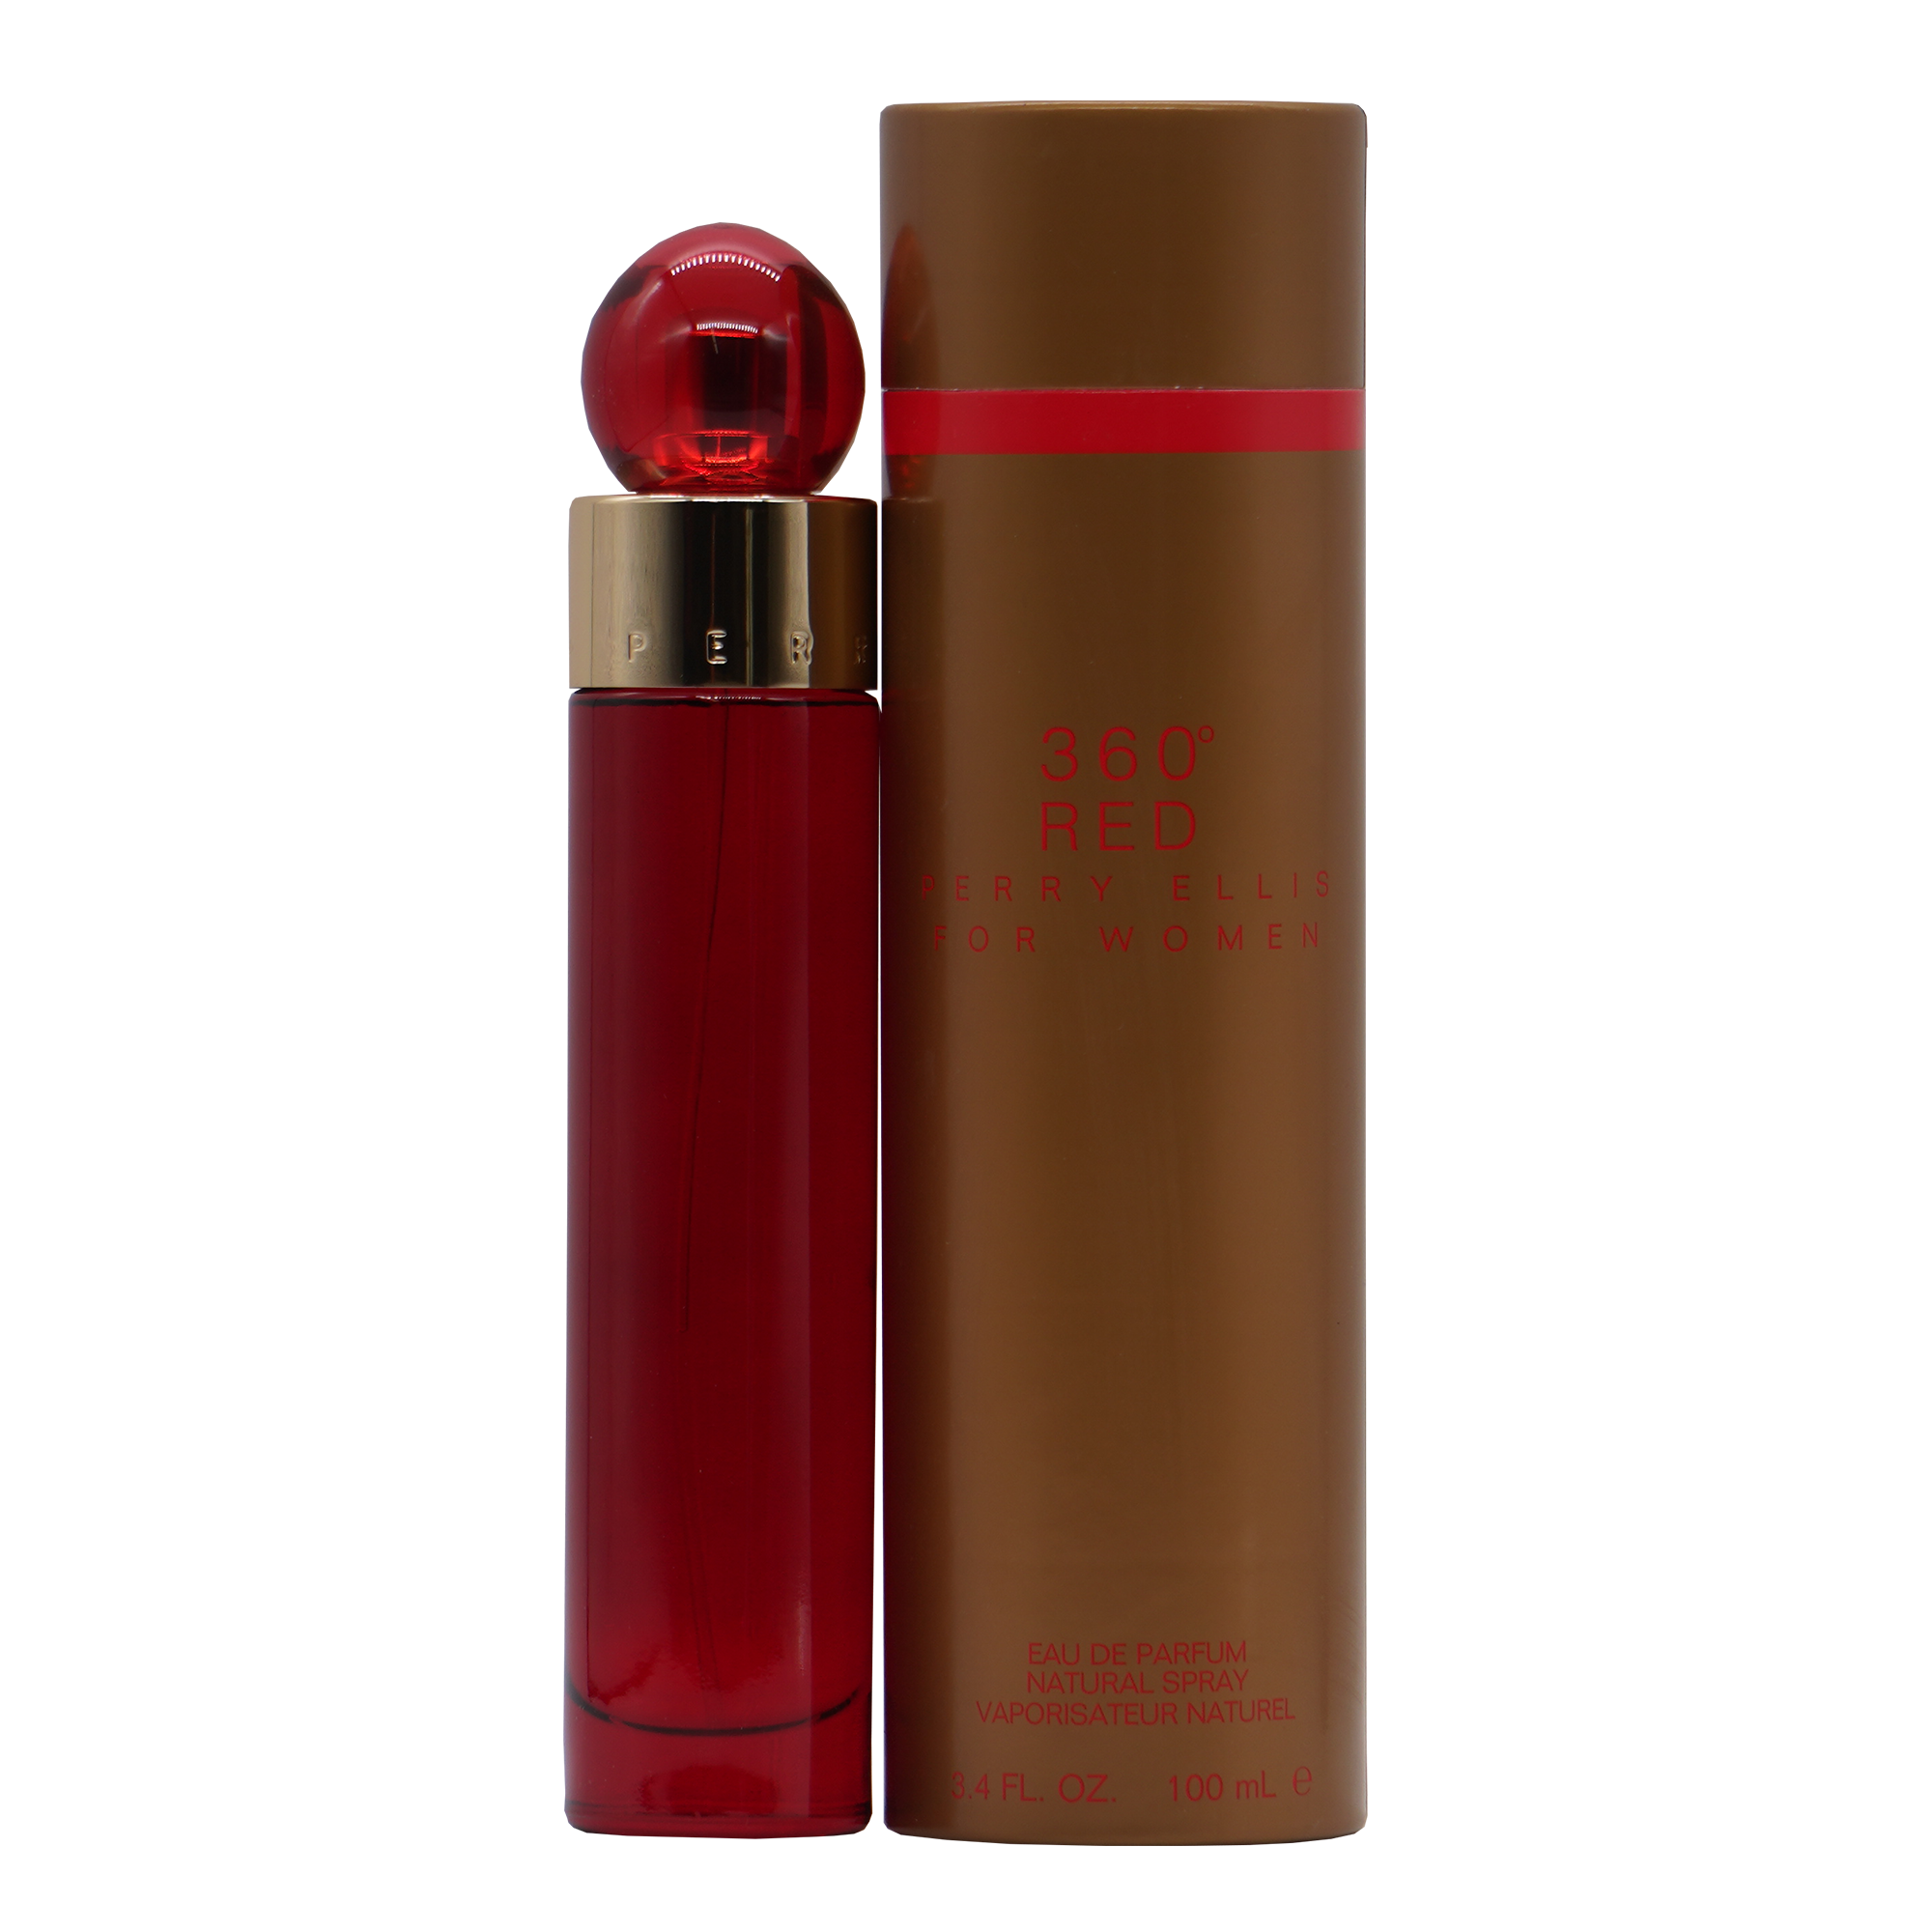 Perry Ellis 360 Red For Women by EDP Spray